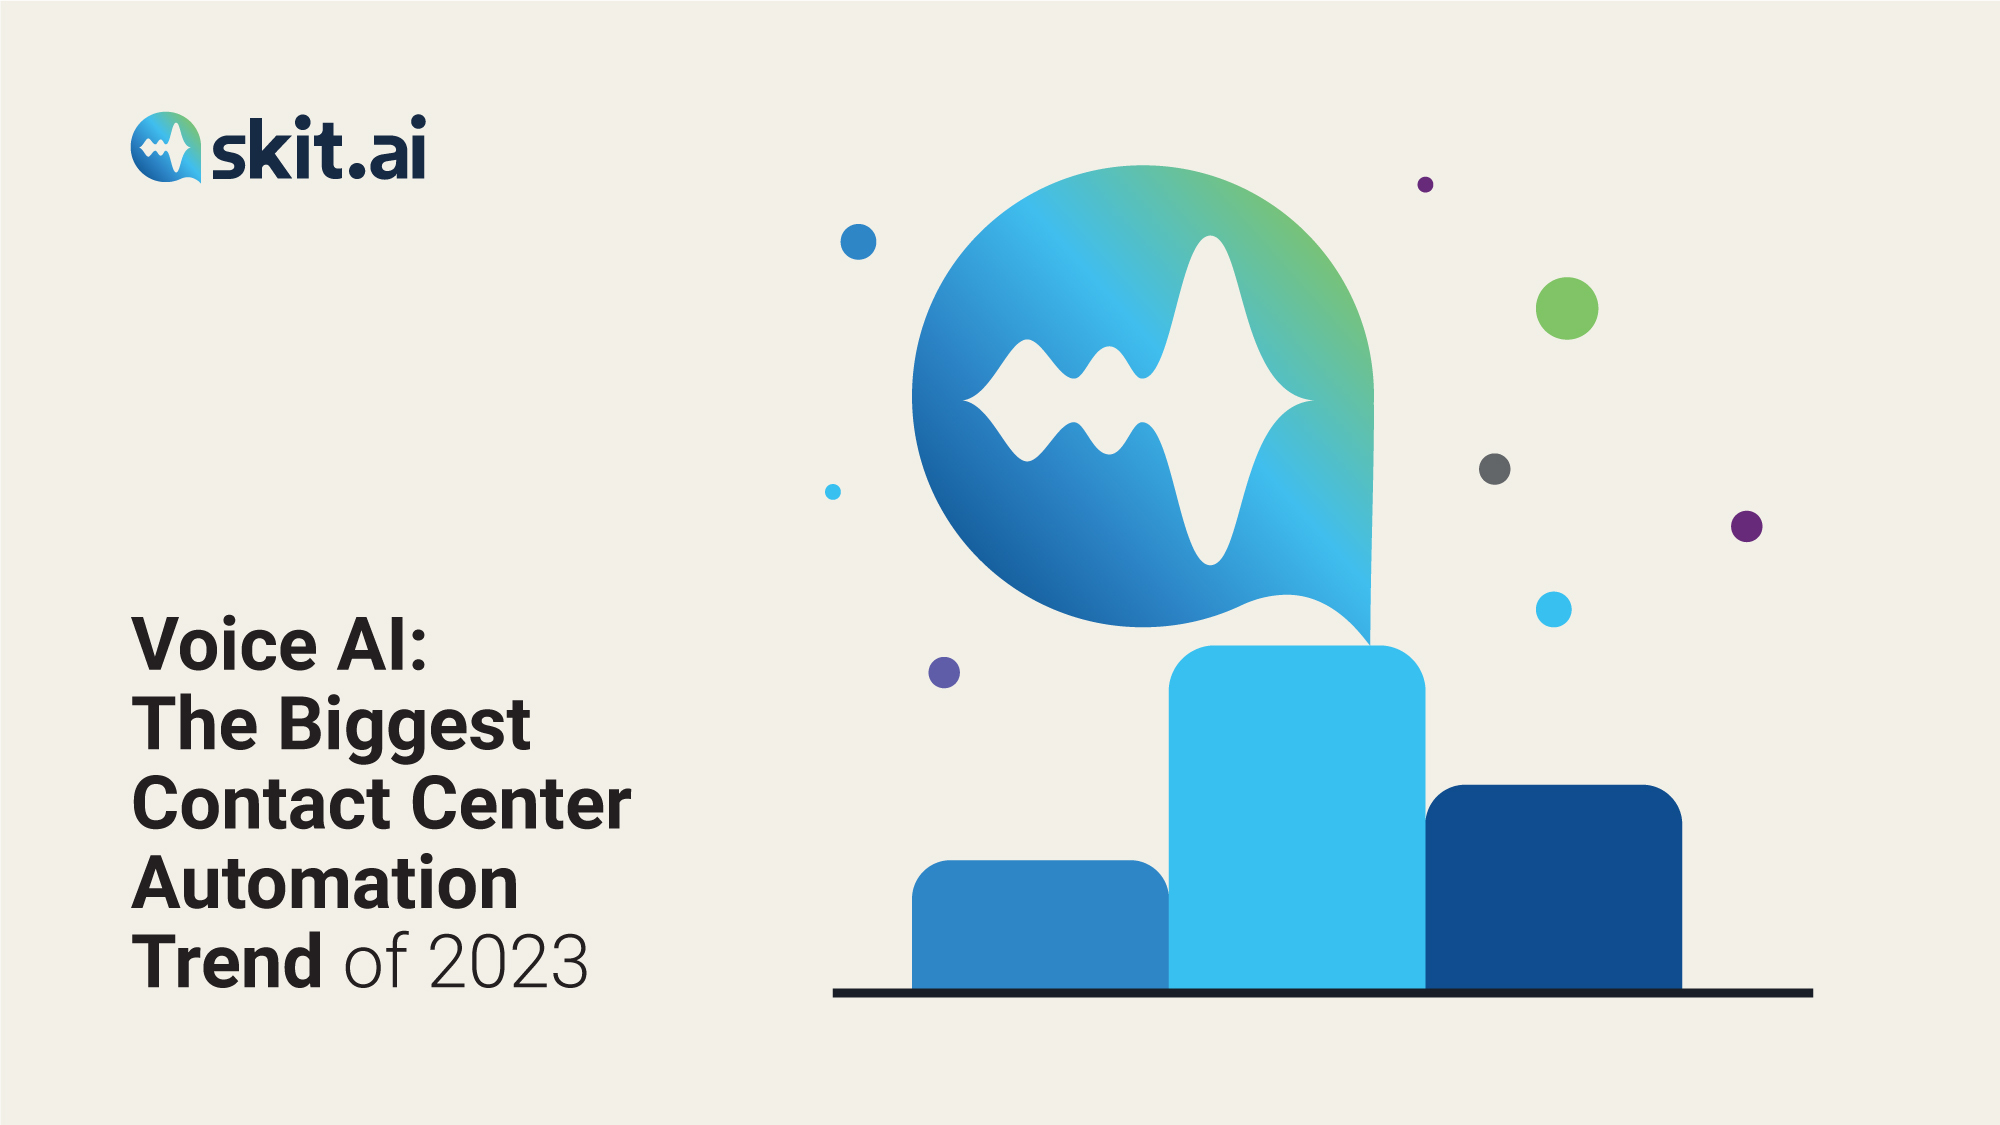 Voice AI: The Biggest Contact Center Automation Trend of 2023